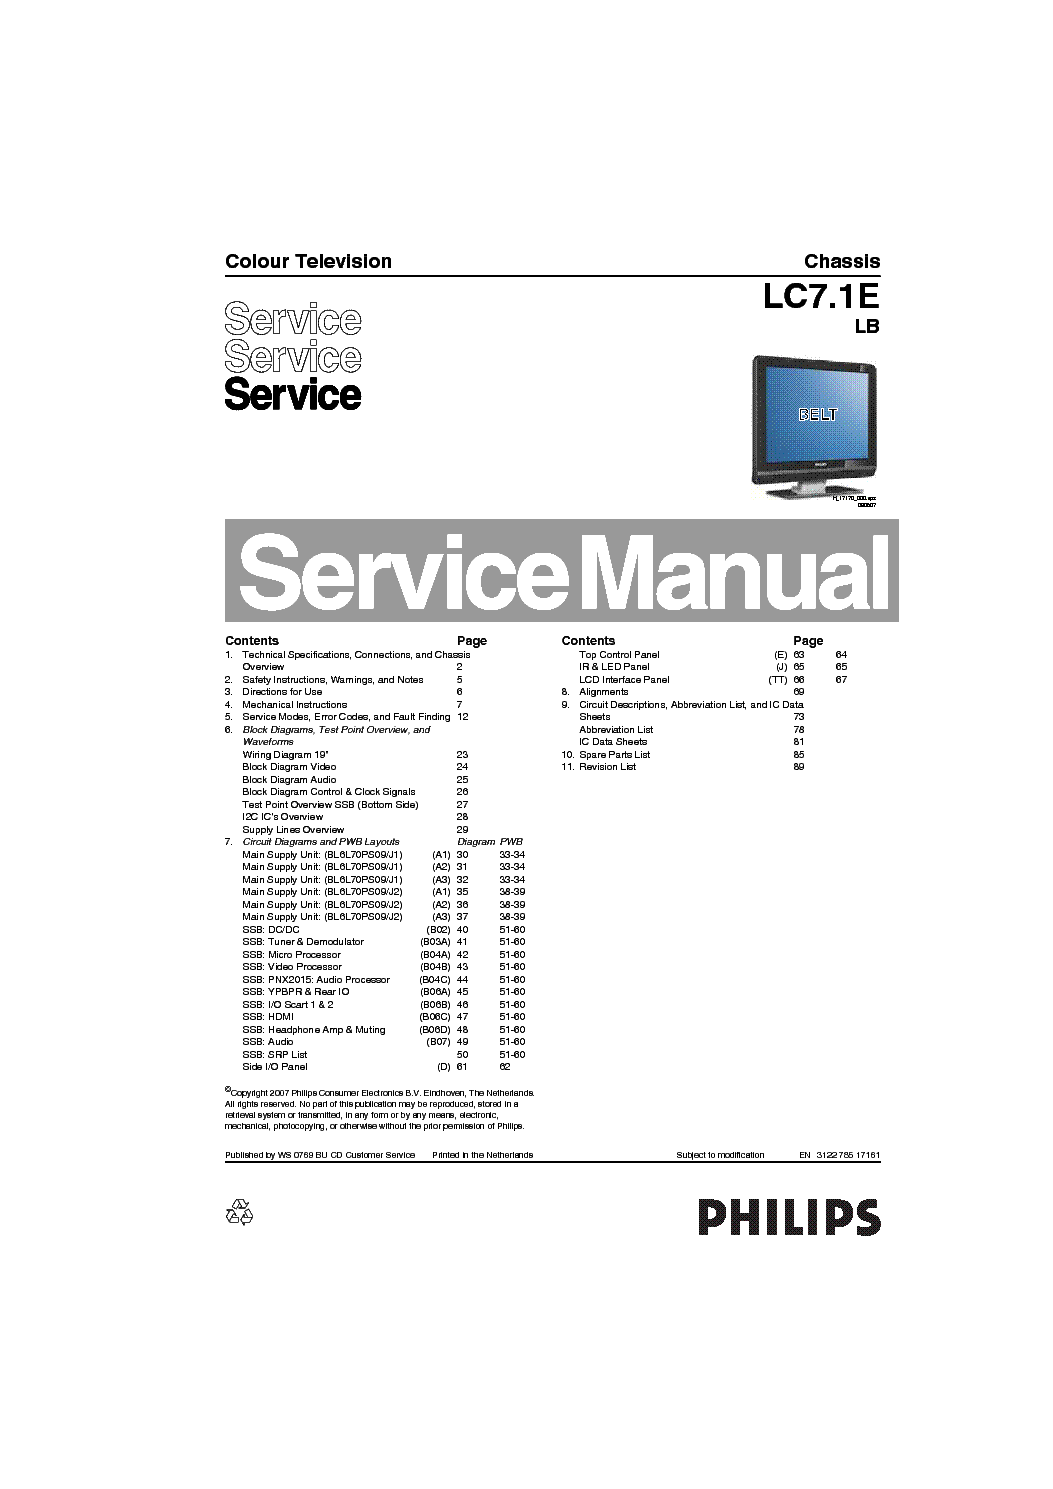 PHILIPS LC7.1E LB CHASSIS LCD TV SM service manual (1st page)